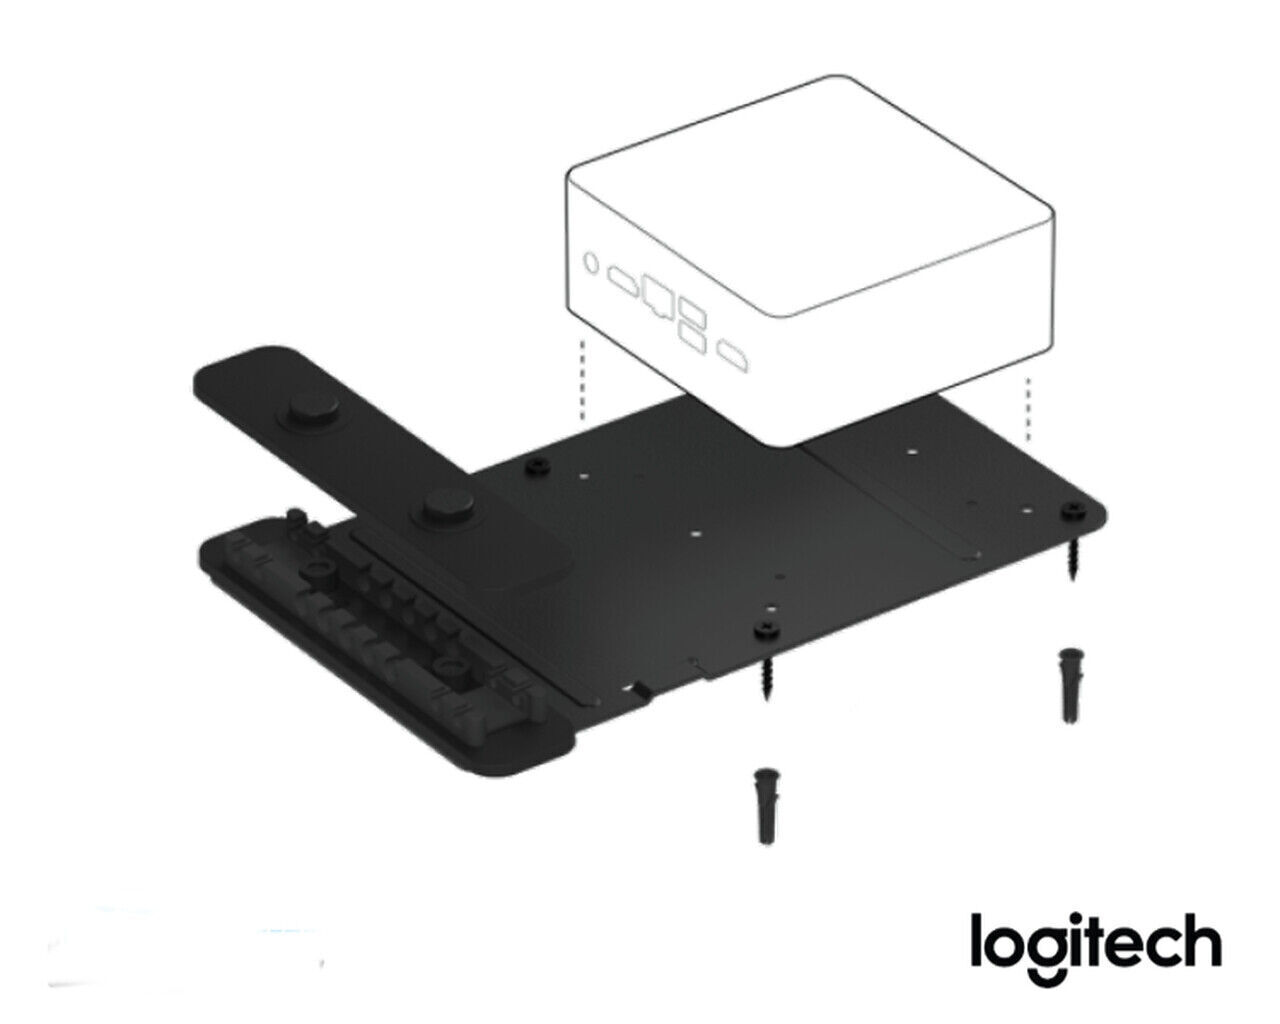 Logitech PC MOUNT Mounting bracket with cable retention for mini PC & Chromebox